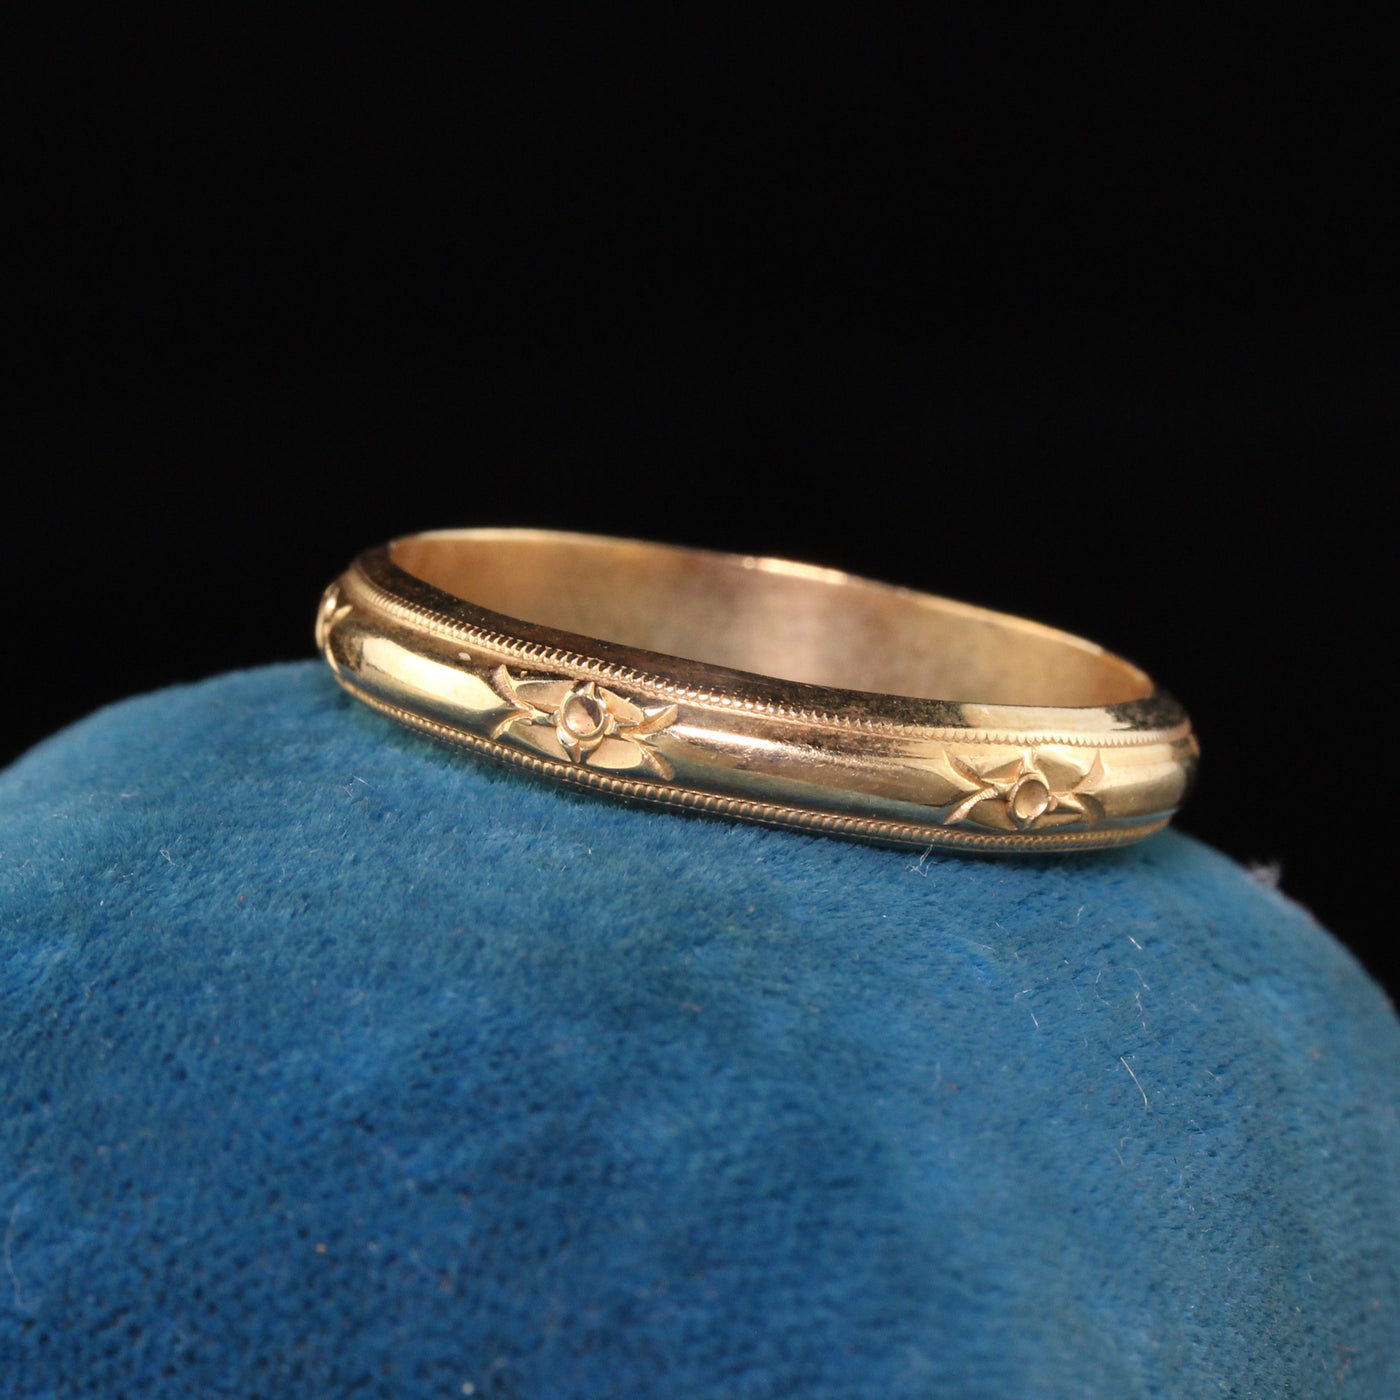 Antique Art Deco 14K Yellow Gold Engraved Wedding Band - Size 11 1/2